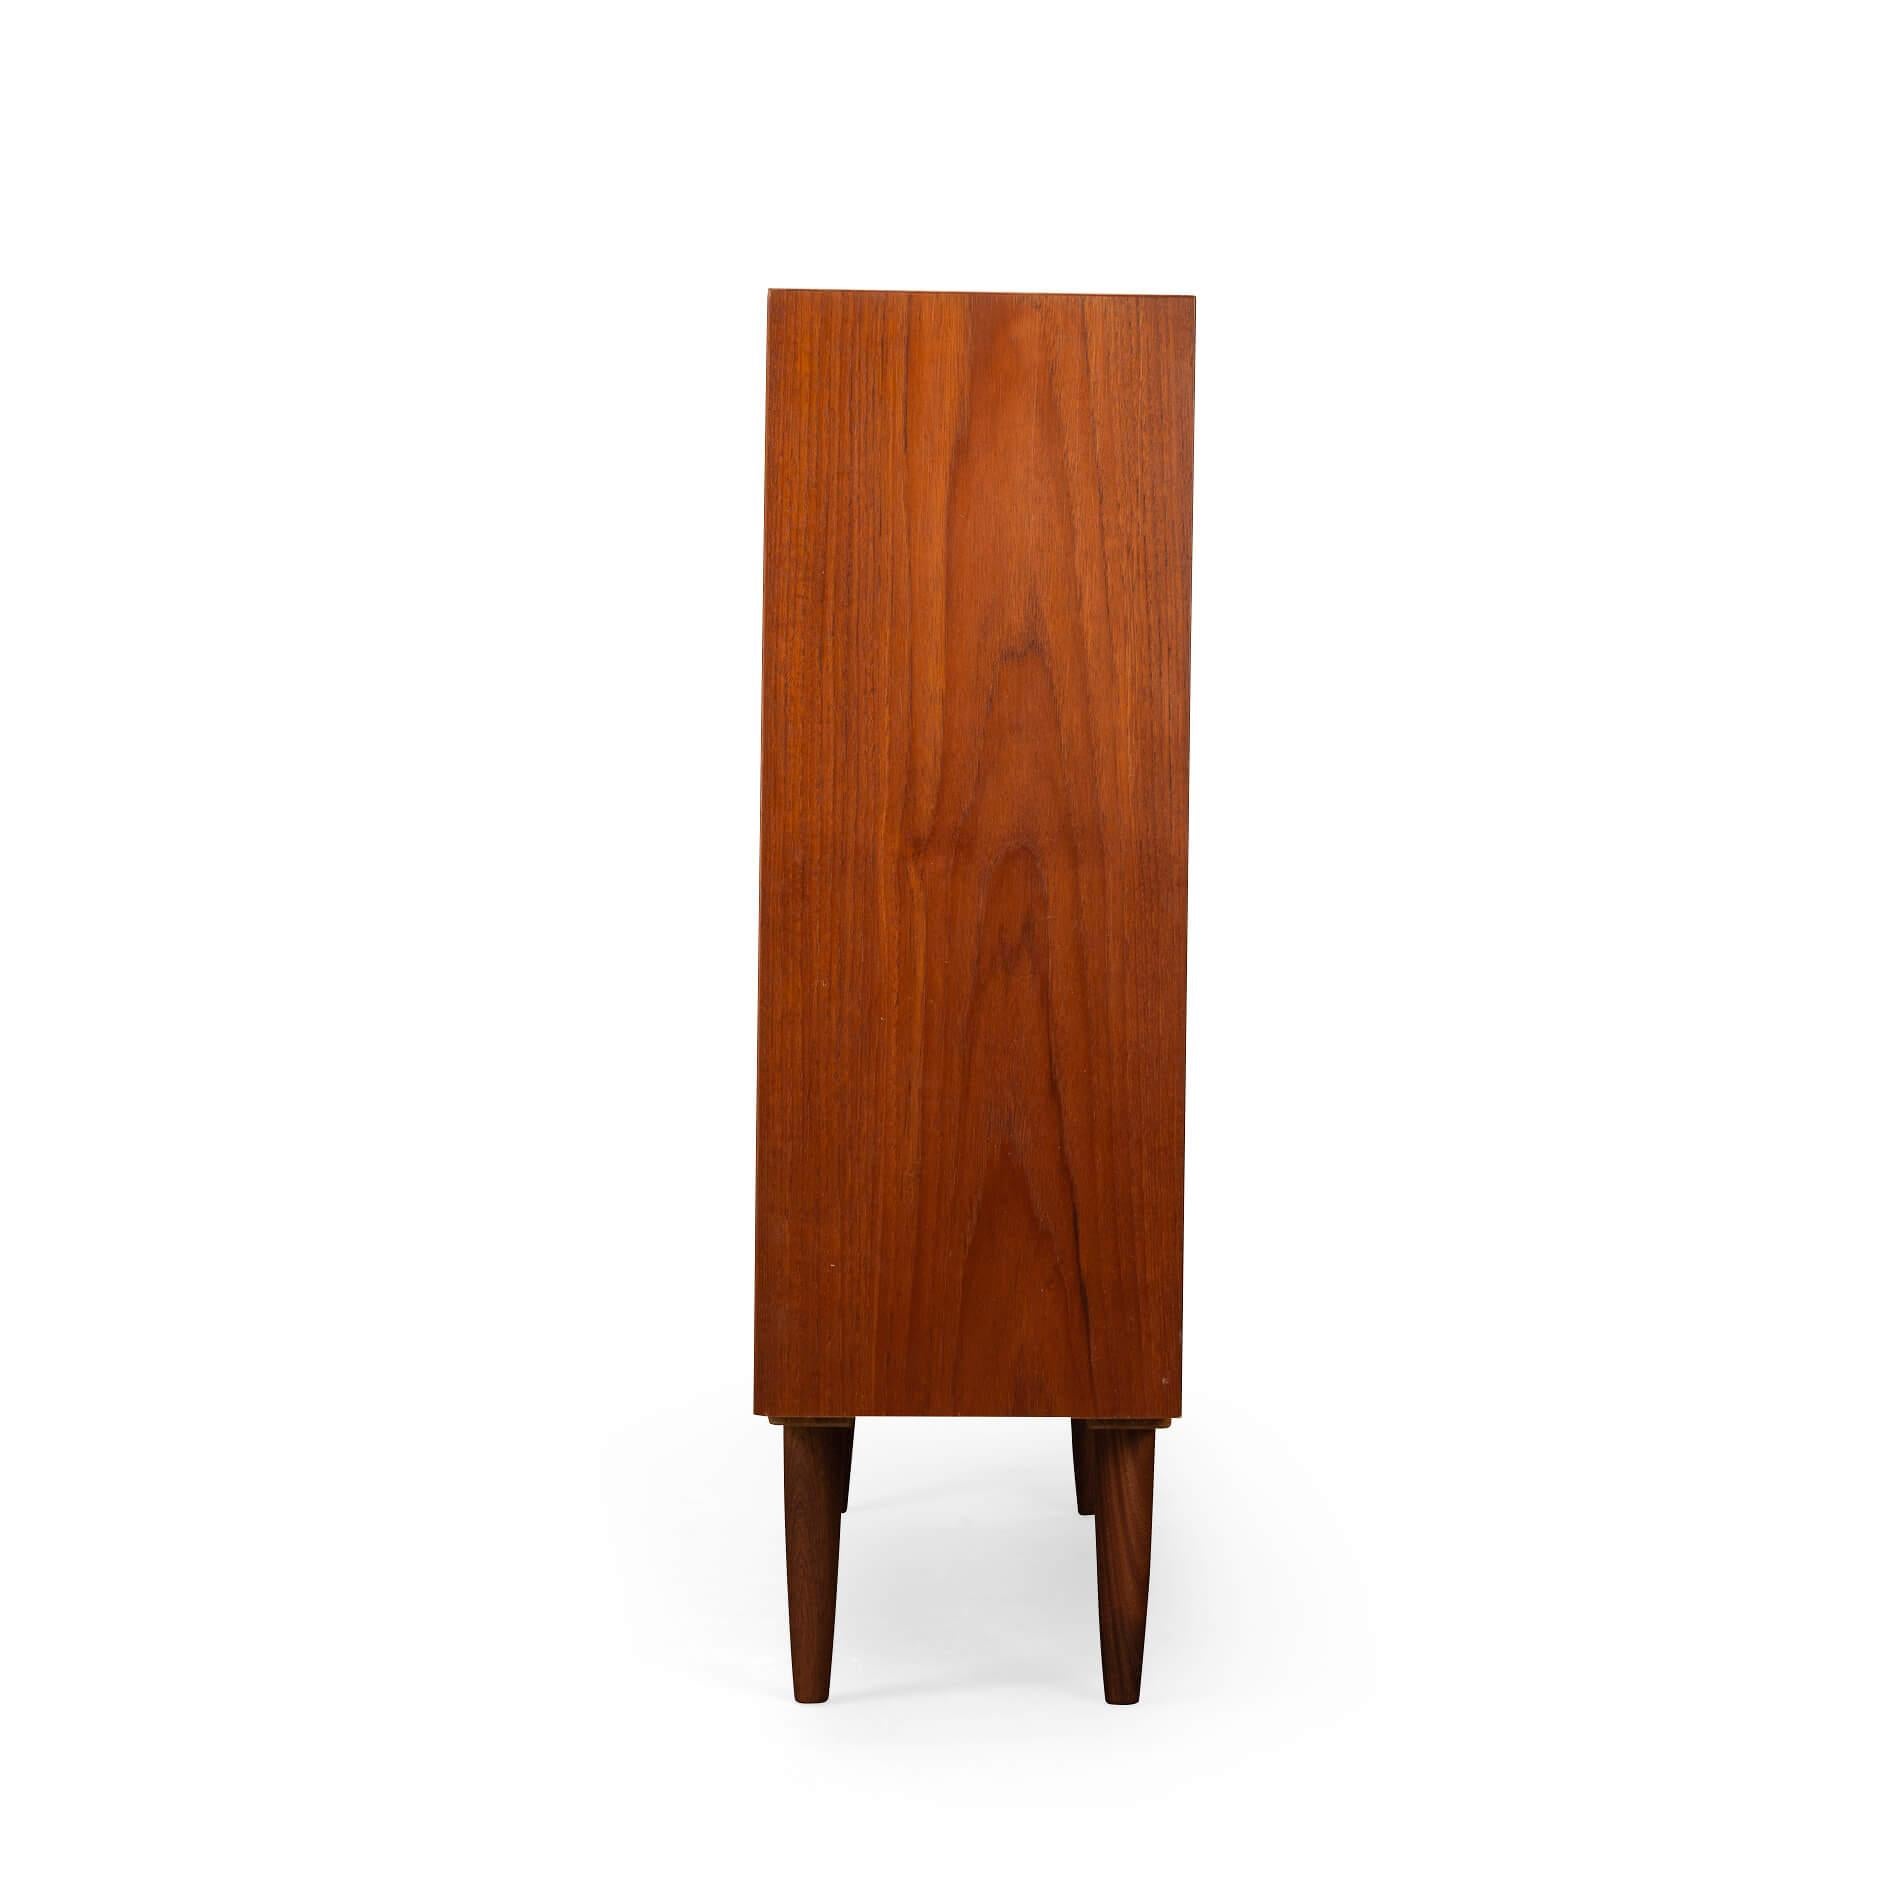 Danish Design: Bookcase
Danish tall bookcase in beautiful teak veneer. Designed by Carlo Jensen and made by Hundevad & Co. The sloping shelves are characteristic of Hundevad & Co bookcases.

This bookcase is in very good vintage condition and has a